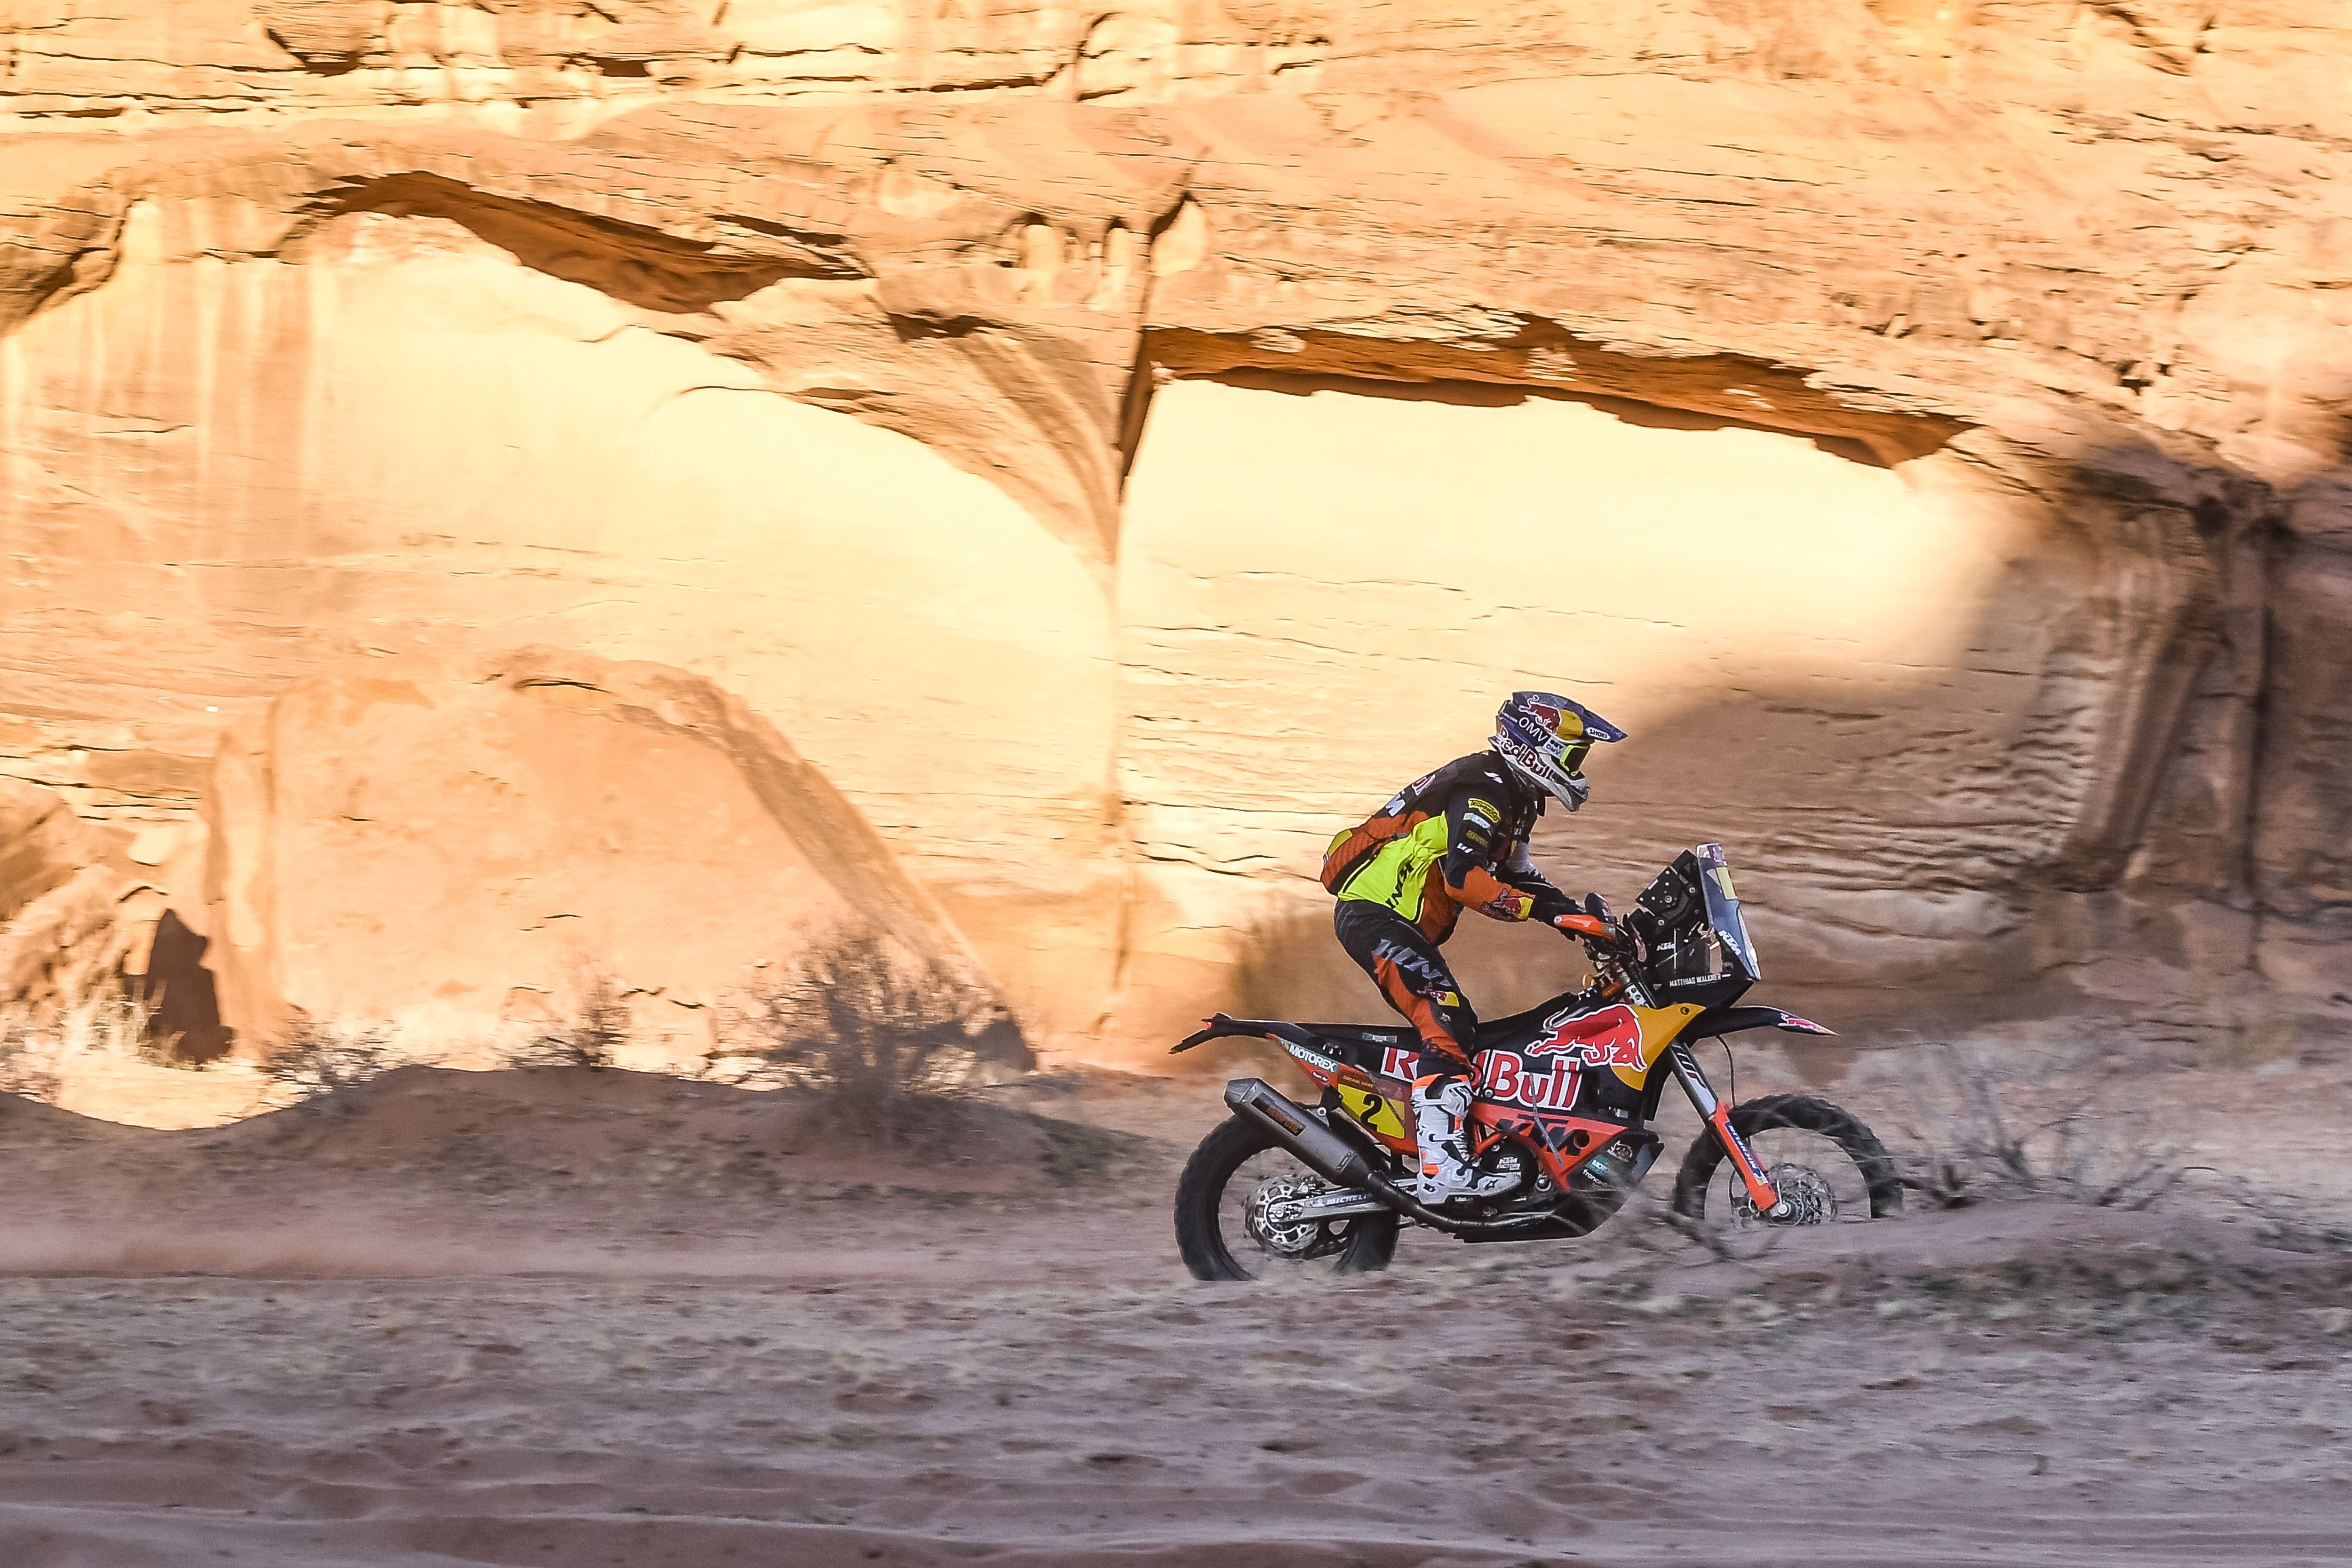 #Dakar 2020: Price catches up, Sunderland falls
- also in the app Motorcycle News